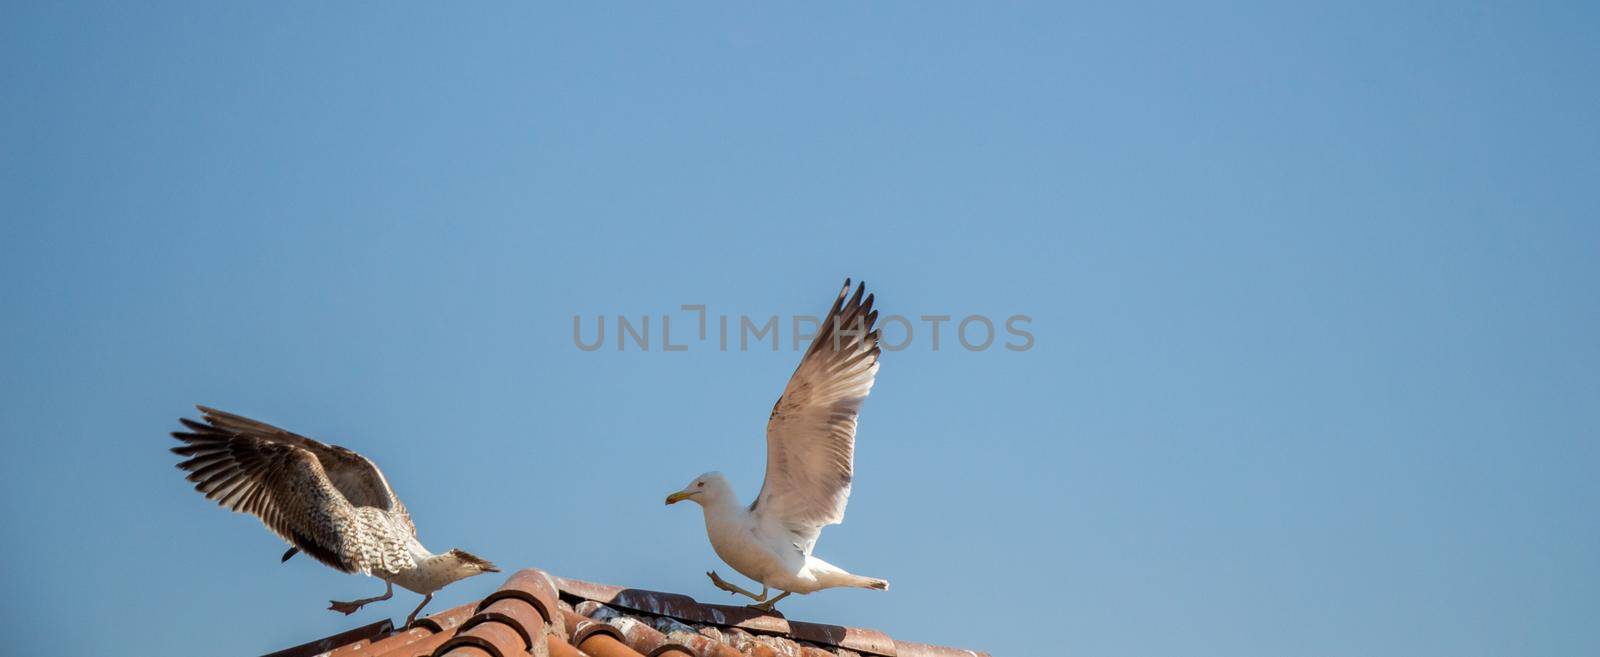 Seagulls sitting on the roof by berkay